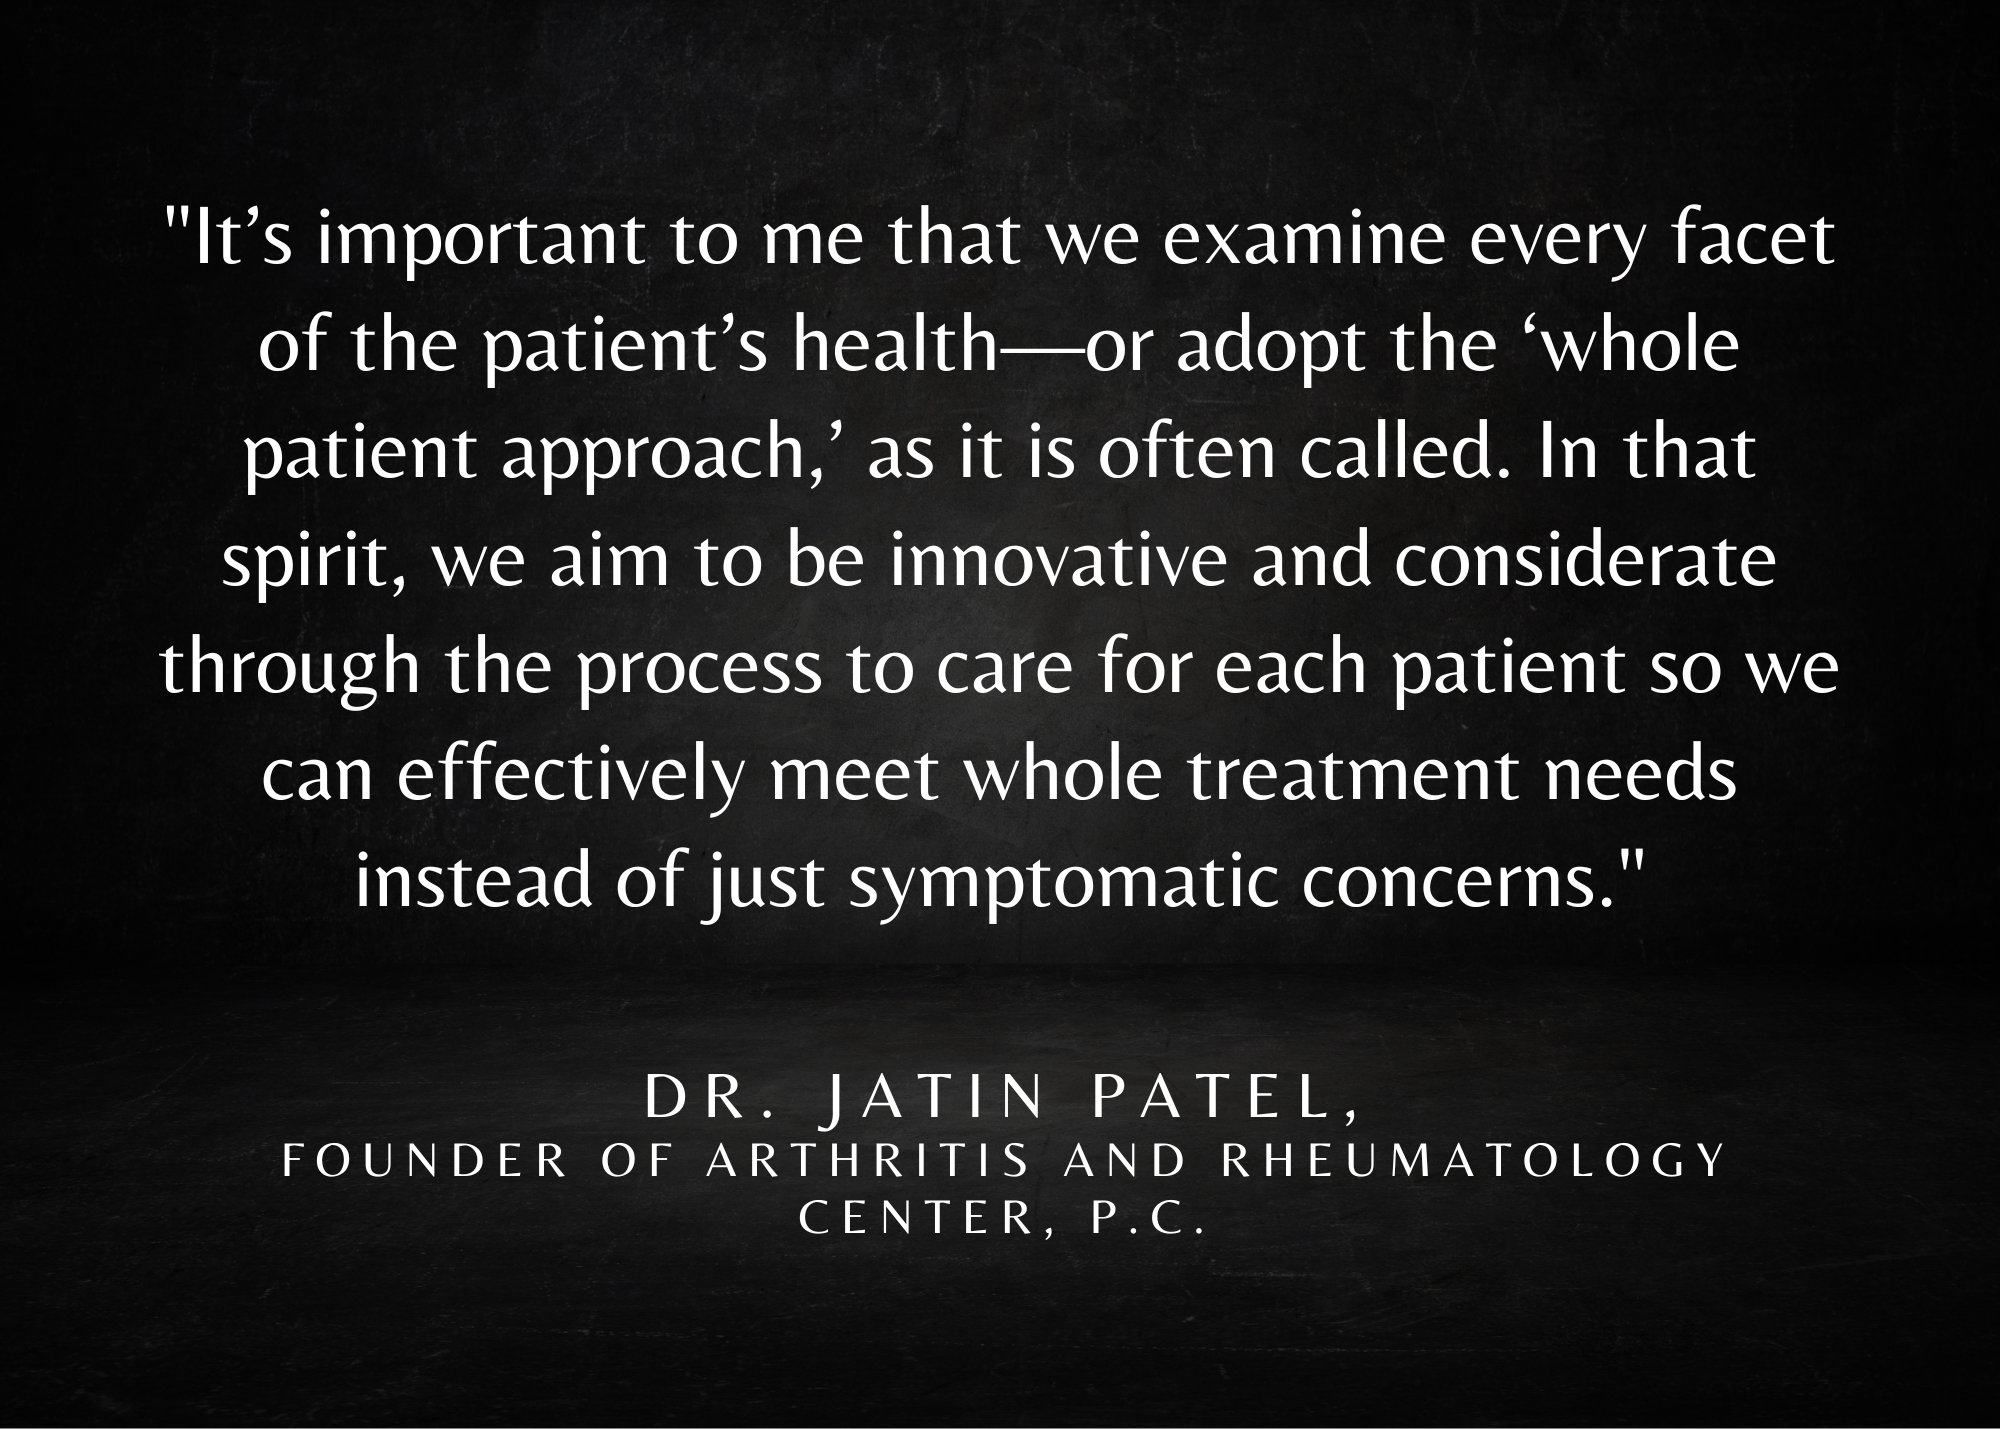 Dr. Jatin Patel, Wednesday, February 15, 2023, Press release picture